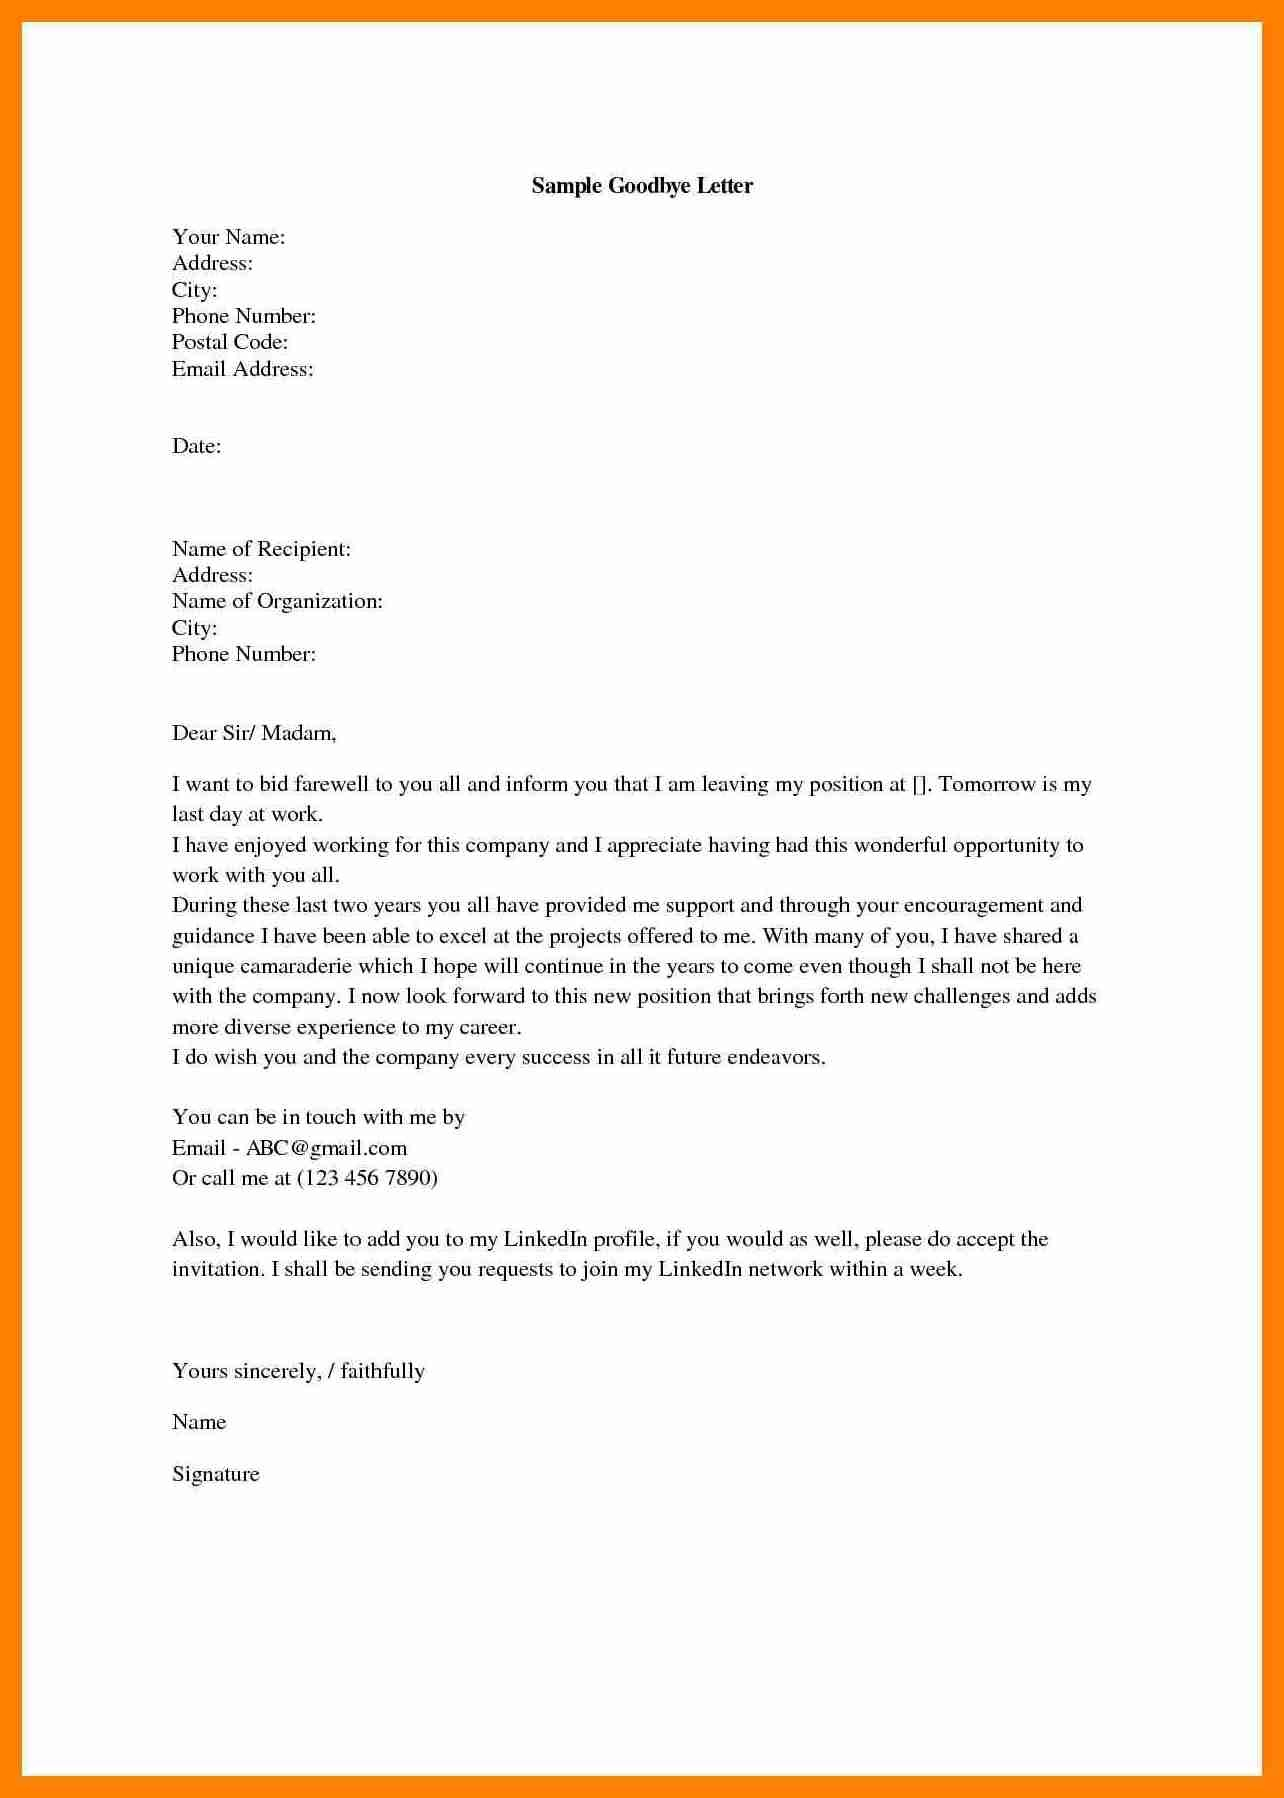 Goodbye Letter to Addiction Template - Sample Goodbye Email to Colleagues at Work Valid Save Best New